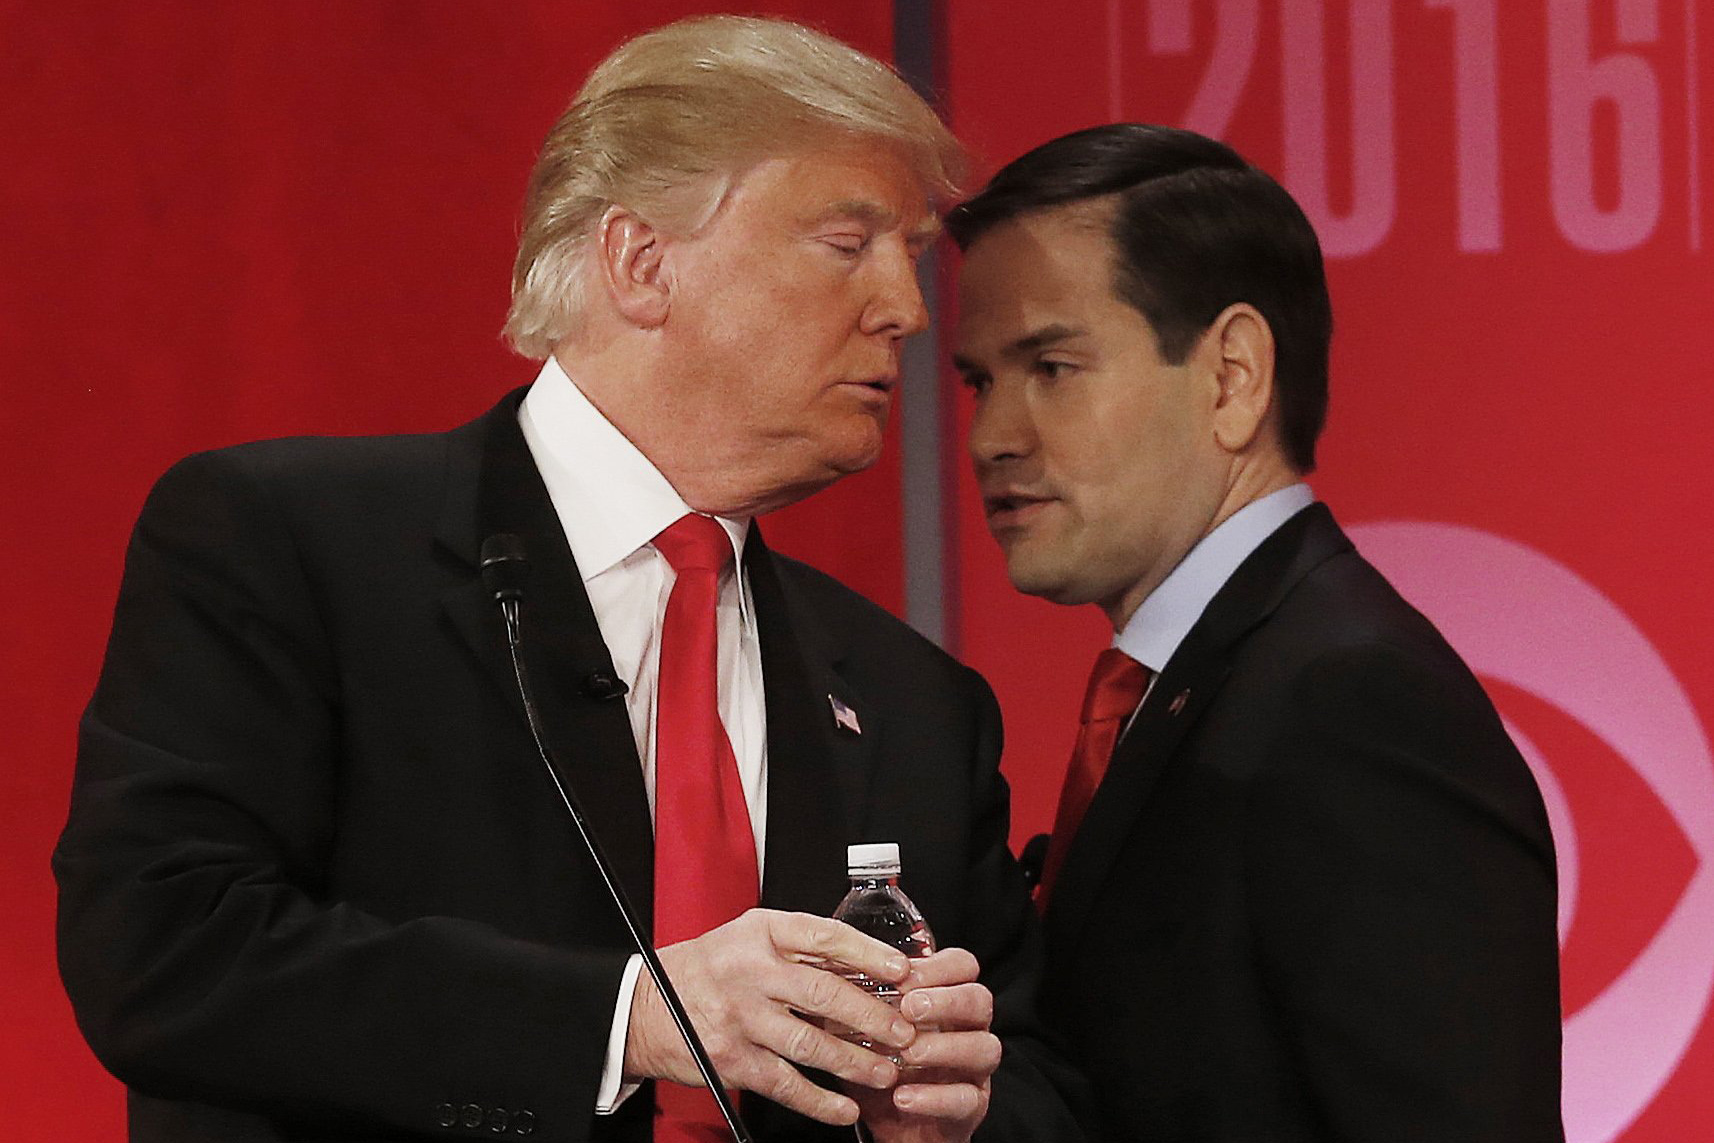 Republican presidential candidate, Sen. Marco Rubio, right, speaks to Republican presidential candidate Donald Trump during the CBS News Republican presidential debate at the Peace Center in Greenville, S.C., Feb. 13, 2016. (John Bazemore—AP)